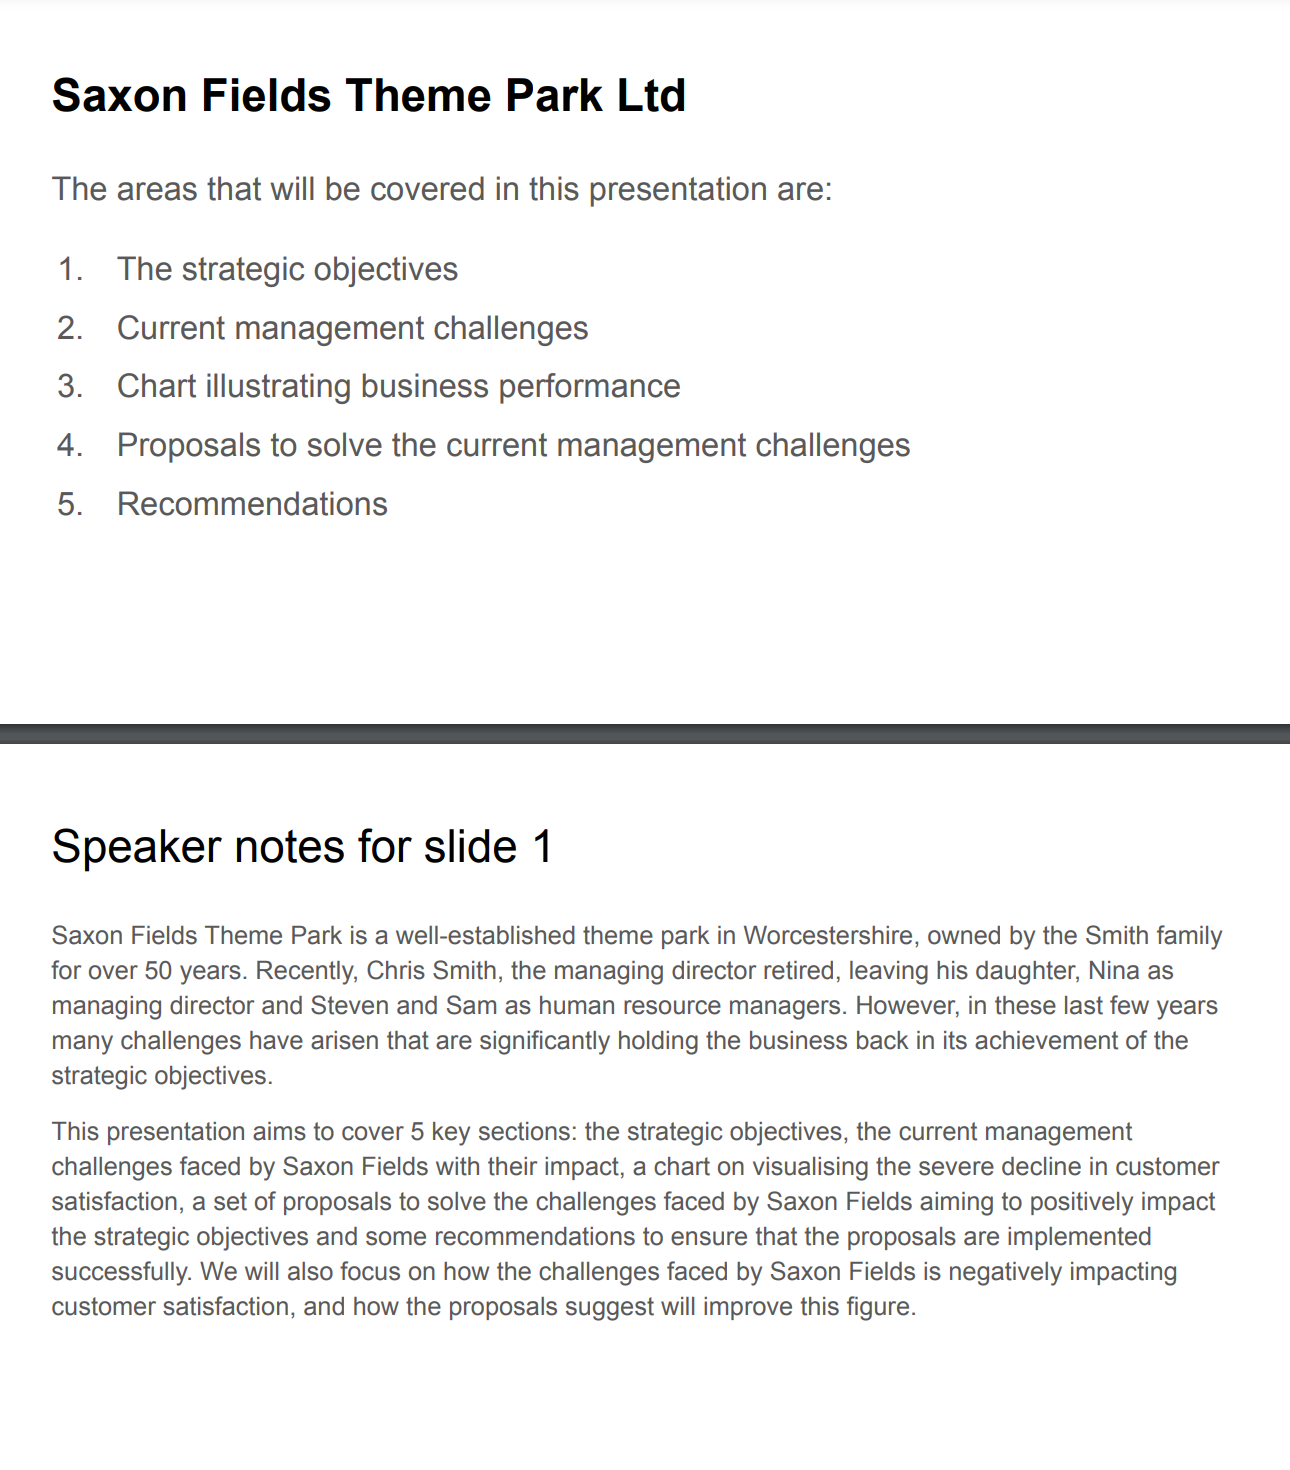 Distinction Graded Example Report and Presentation for Saxon Fields Theme Park Ltd